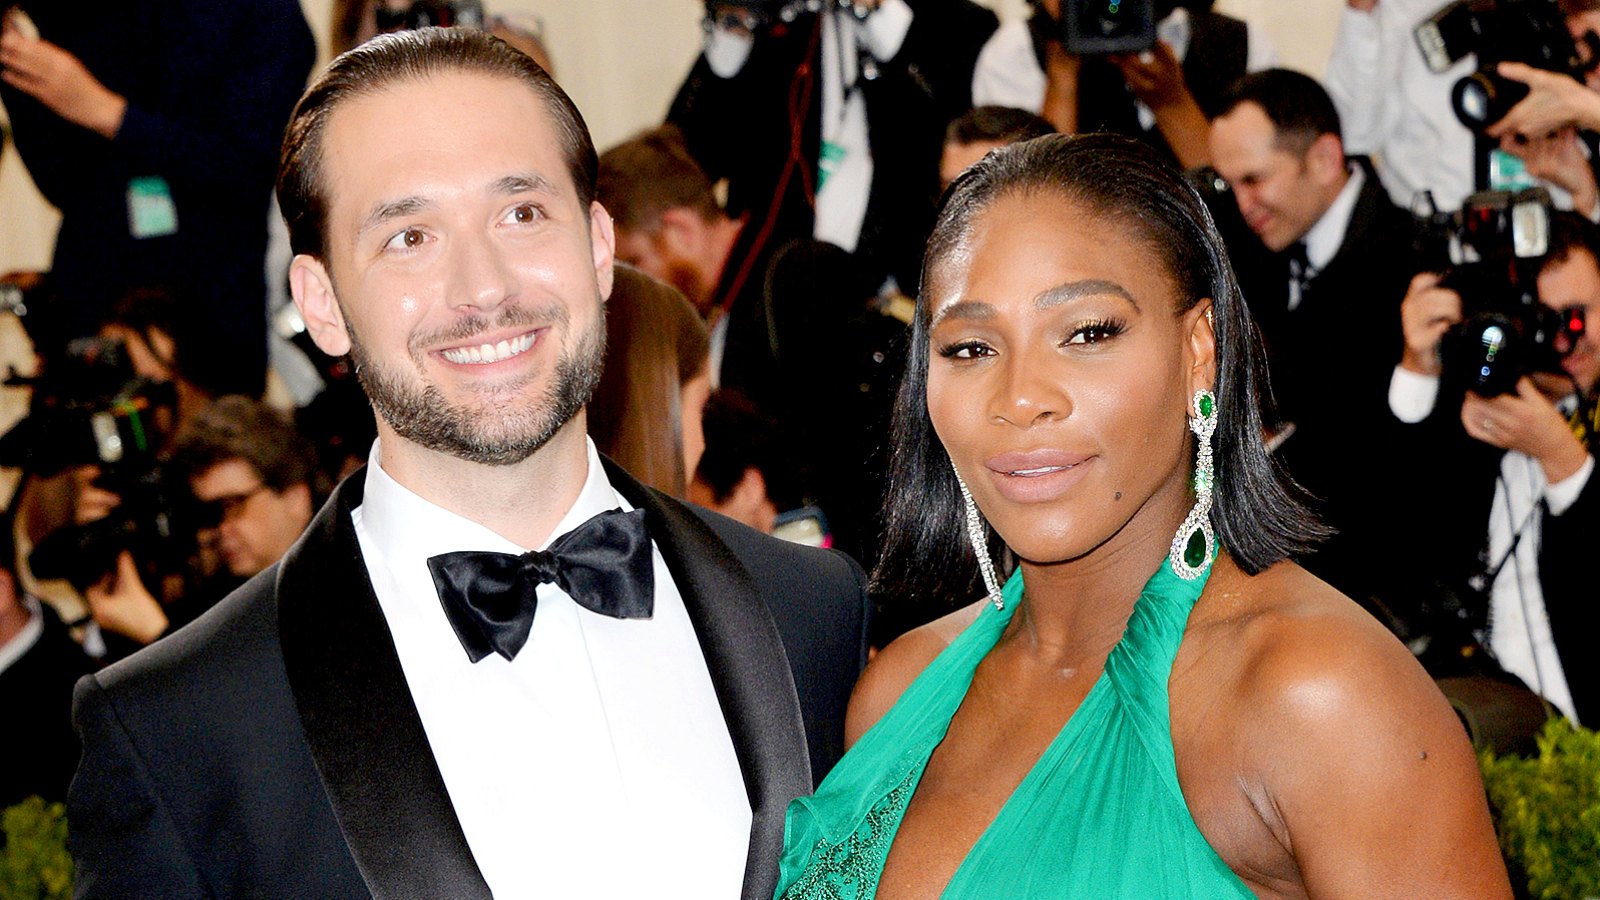 Serena Williams and Alexis Ohanian attend the 2017 Comme des Garcons-Art of the In-Between Costume Institute Gala at the Metropolitan Museum Of Art on May 1, 2017.